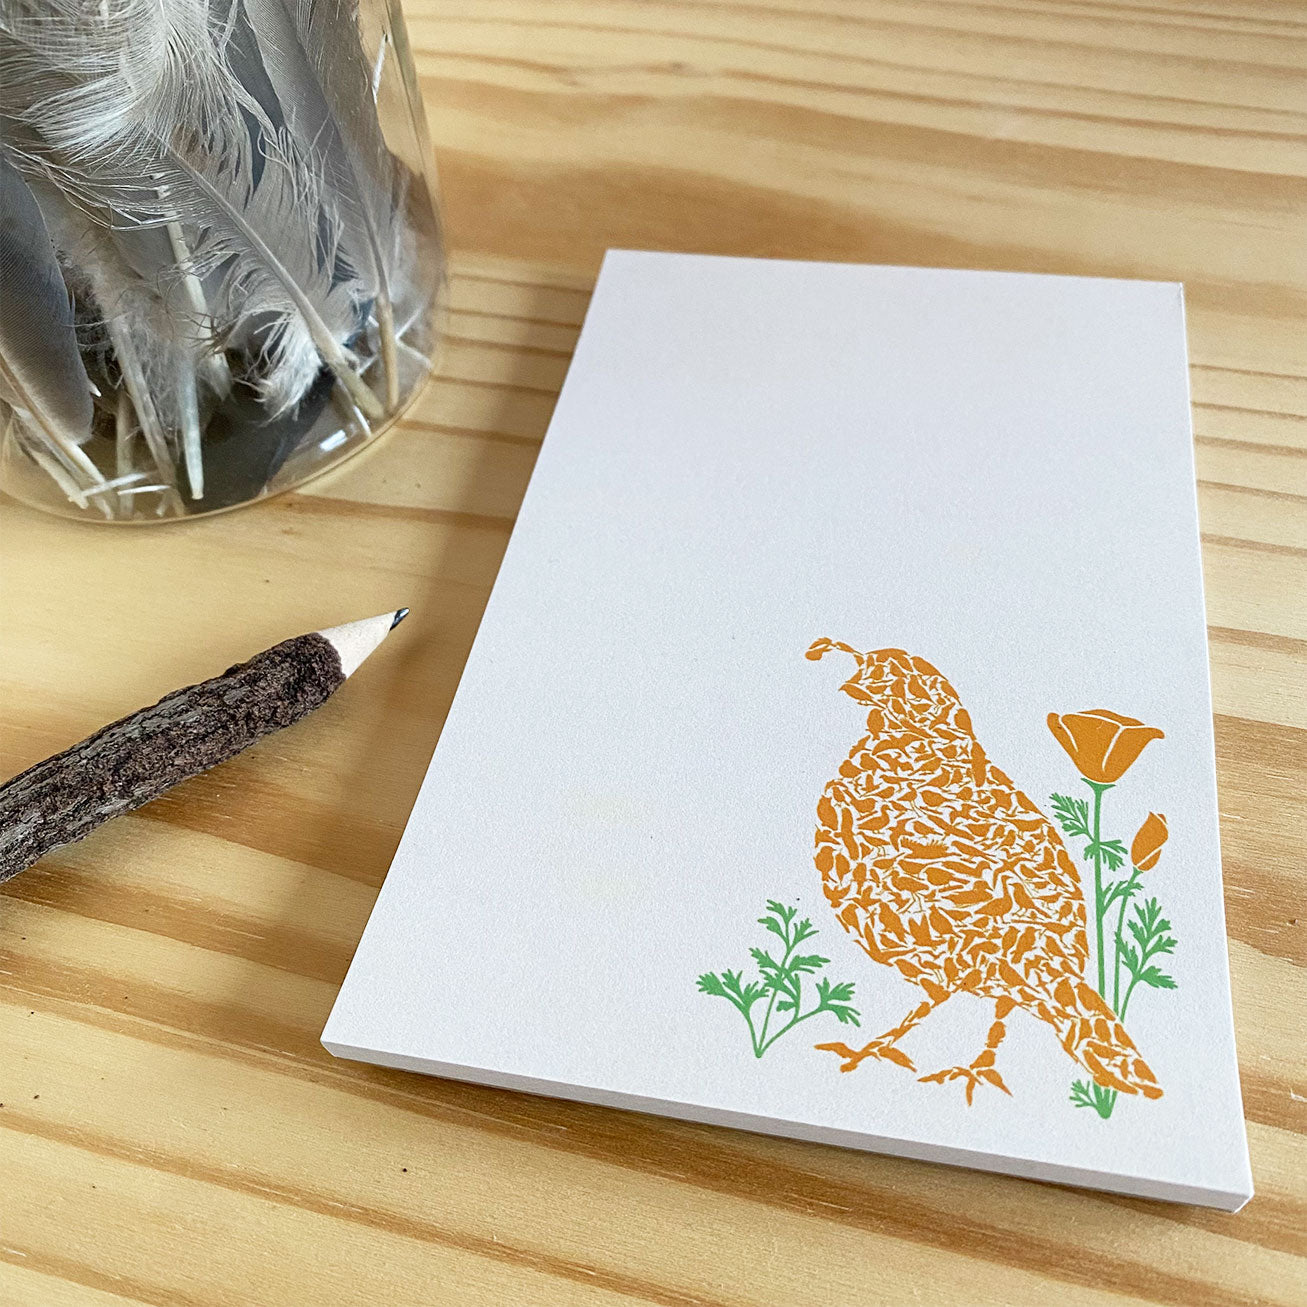 California Quail Recycled Notepad - Alice Frost Studio